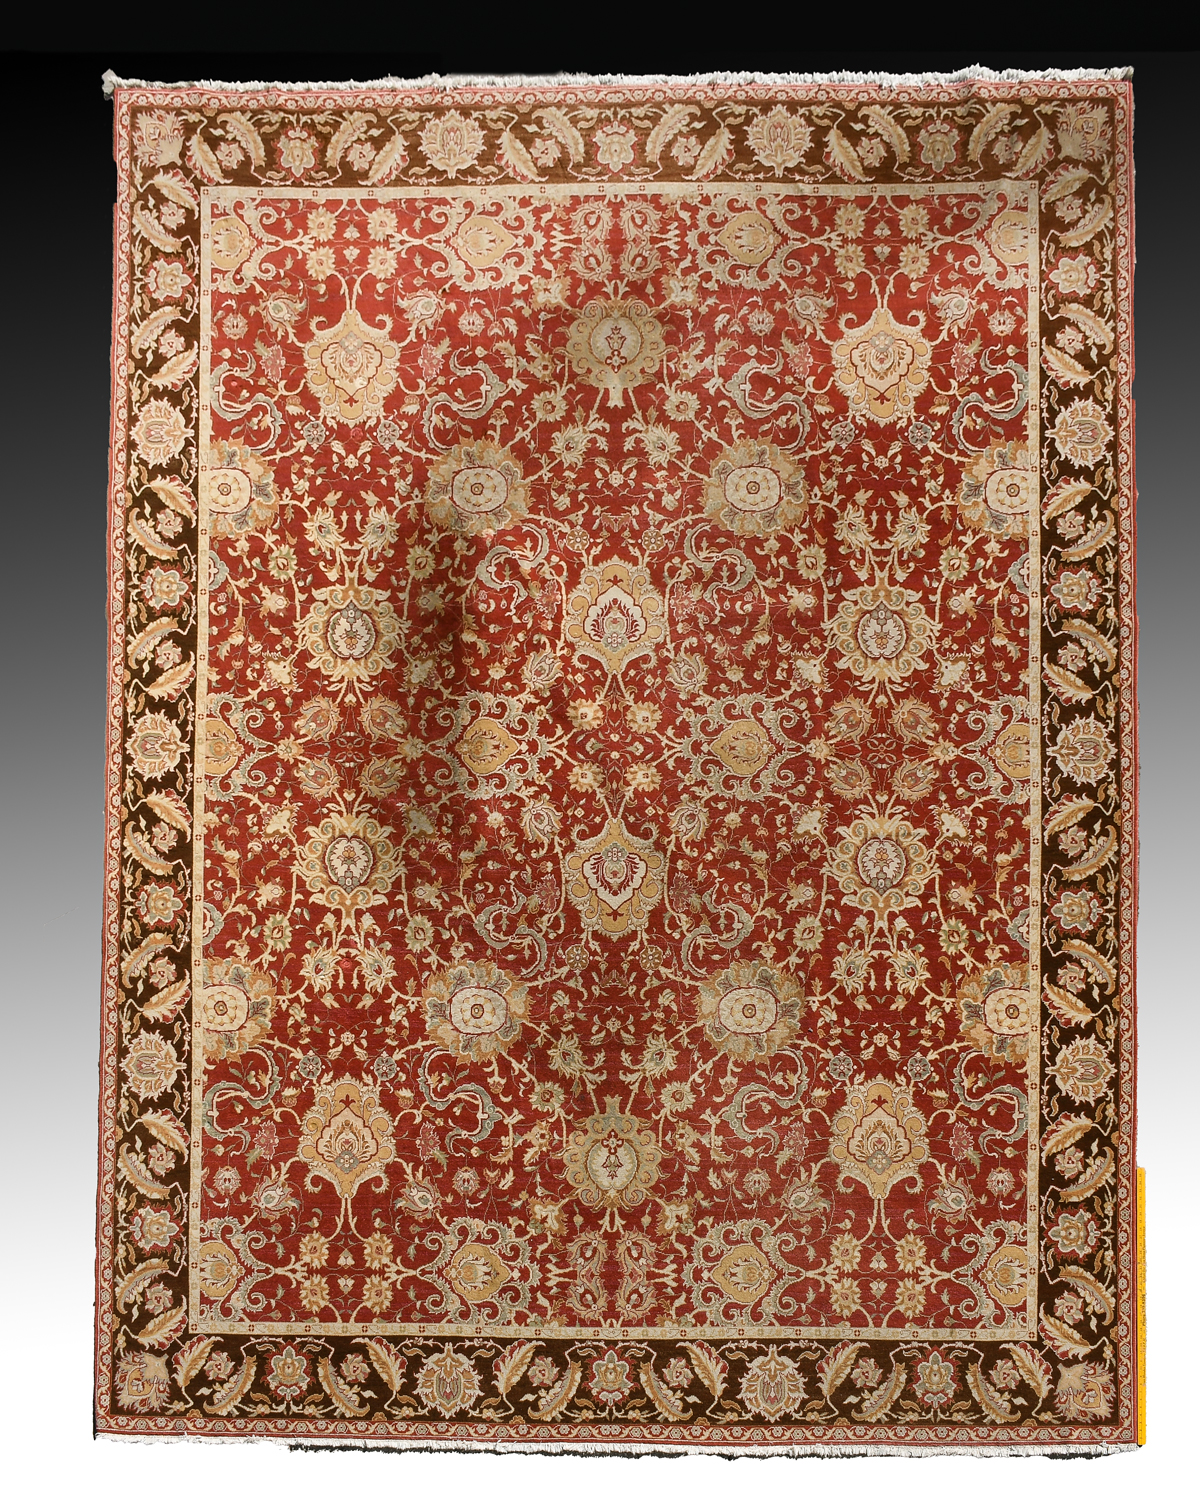 PAK PERSIAN HAND KNOTTED WOOL RUG,